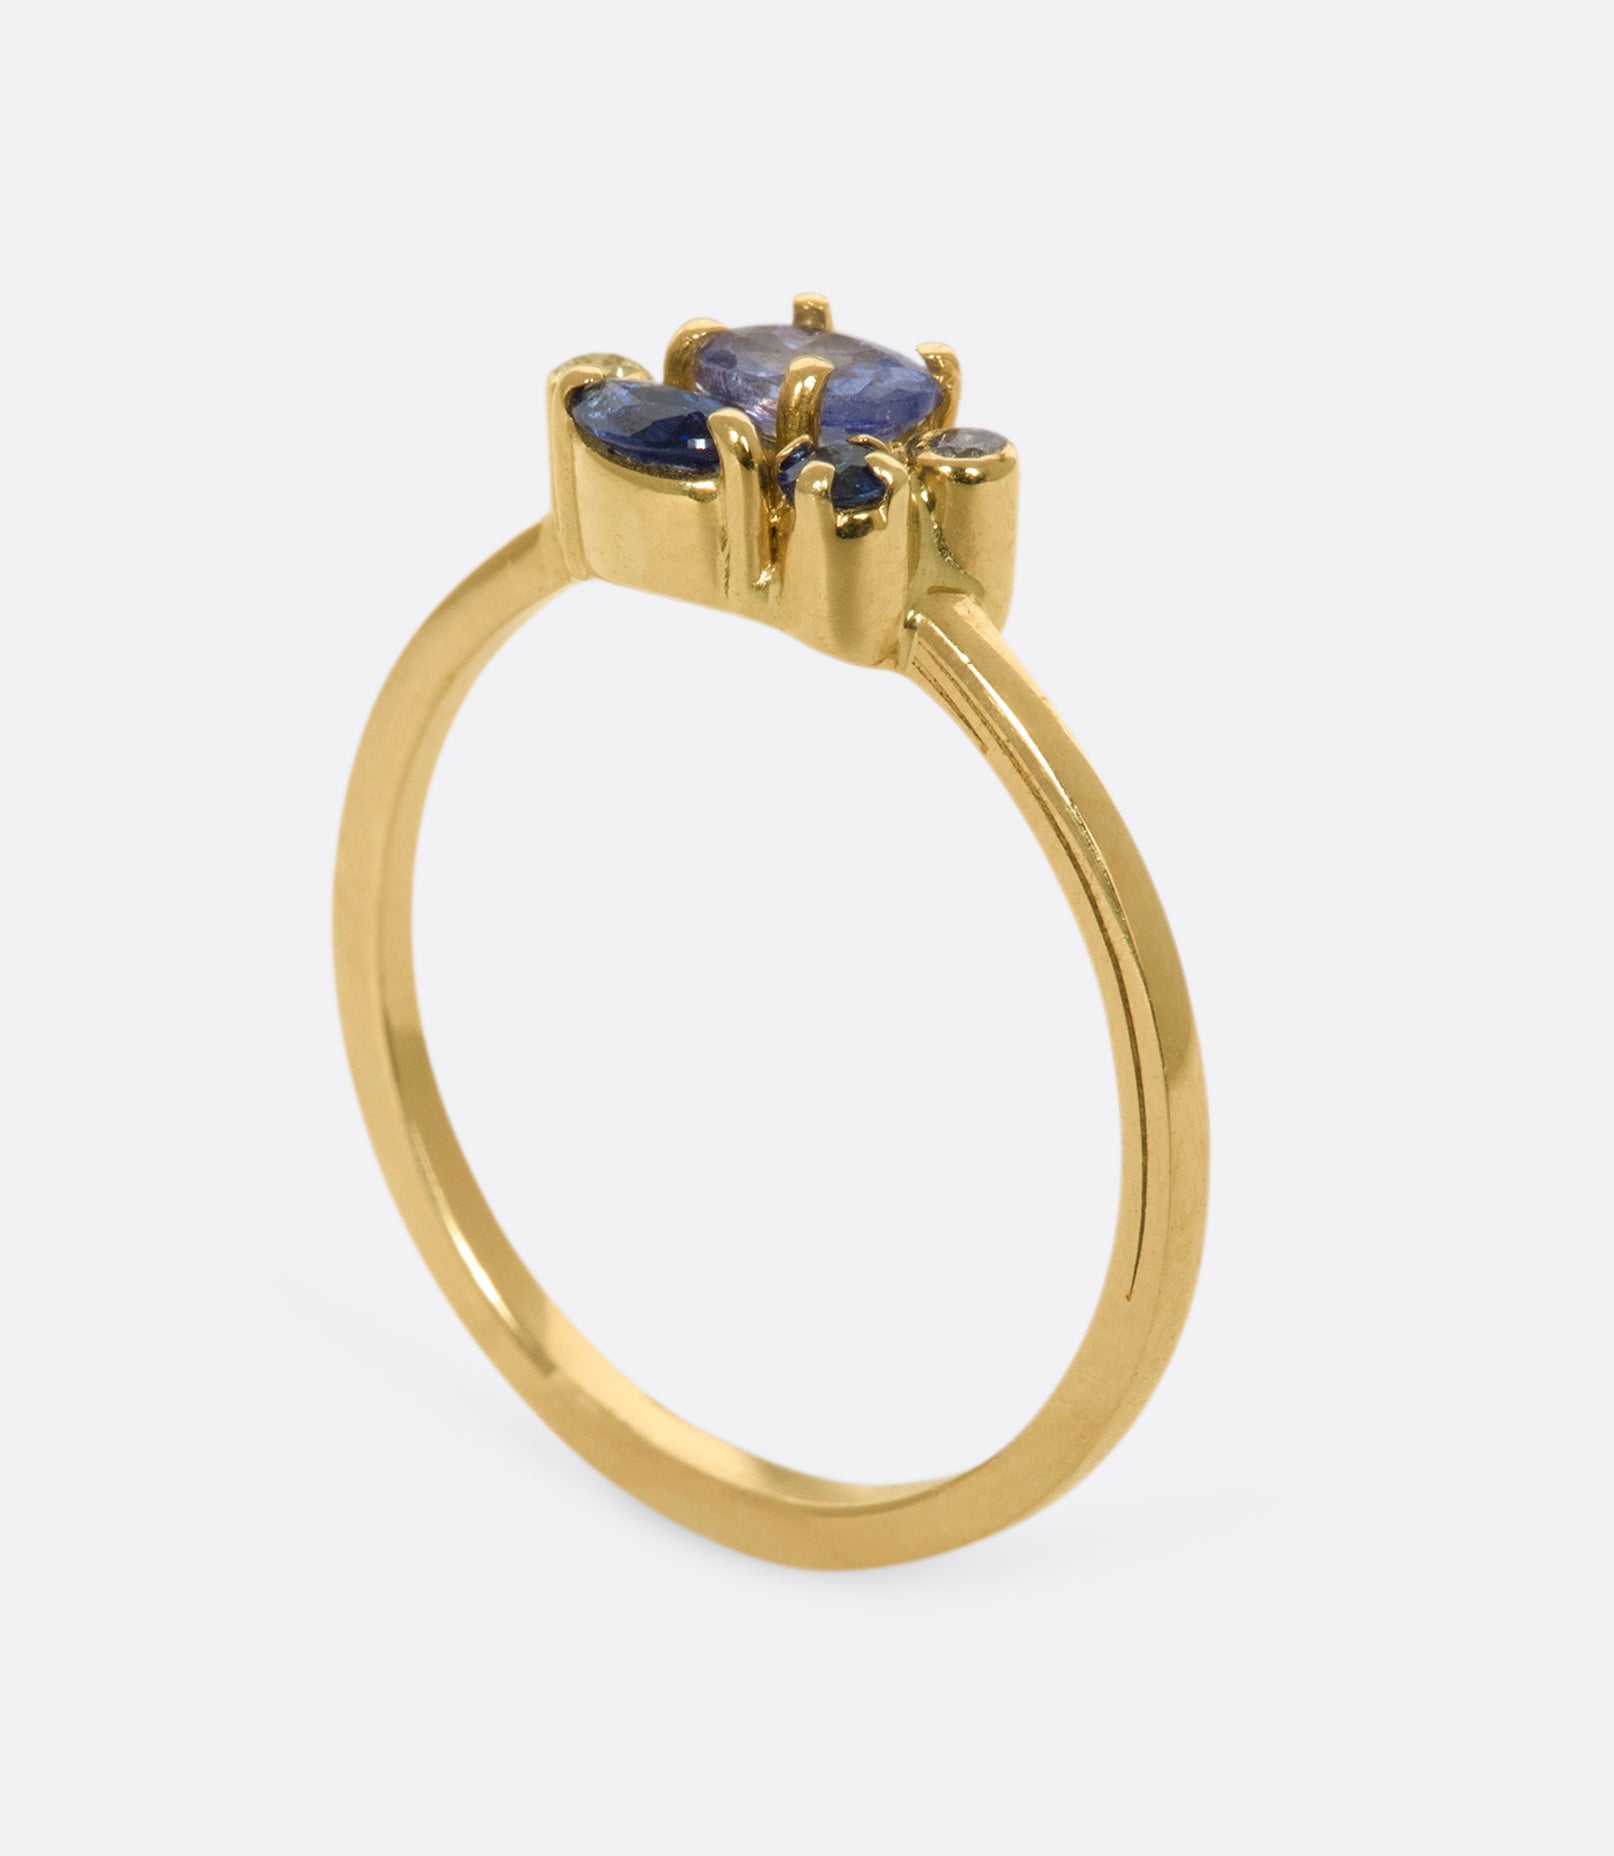 A graceful forget-me-not ring with sapphires, kyanites, and round diamonds on a delicate gold band